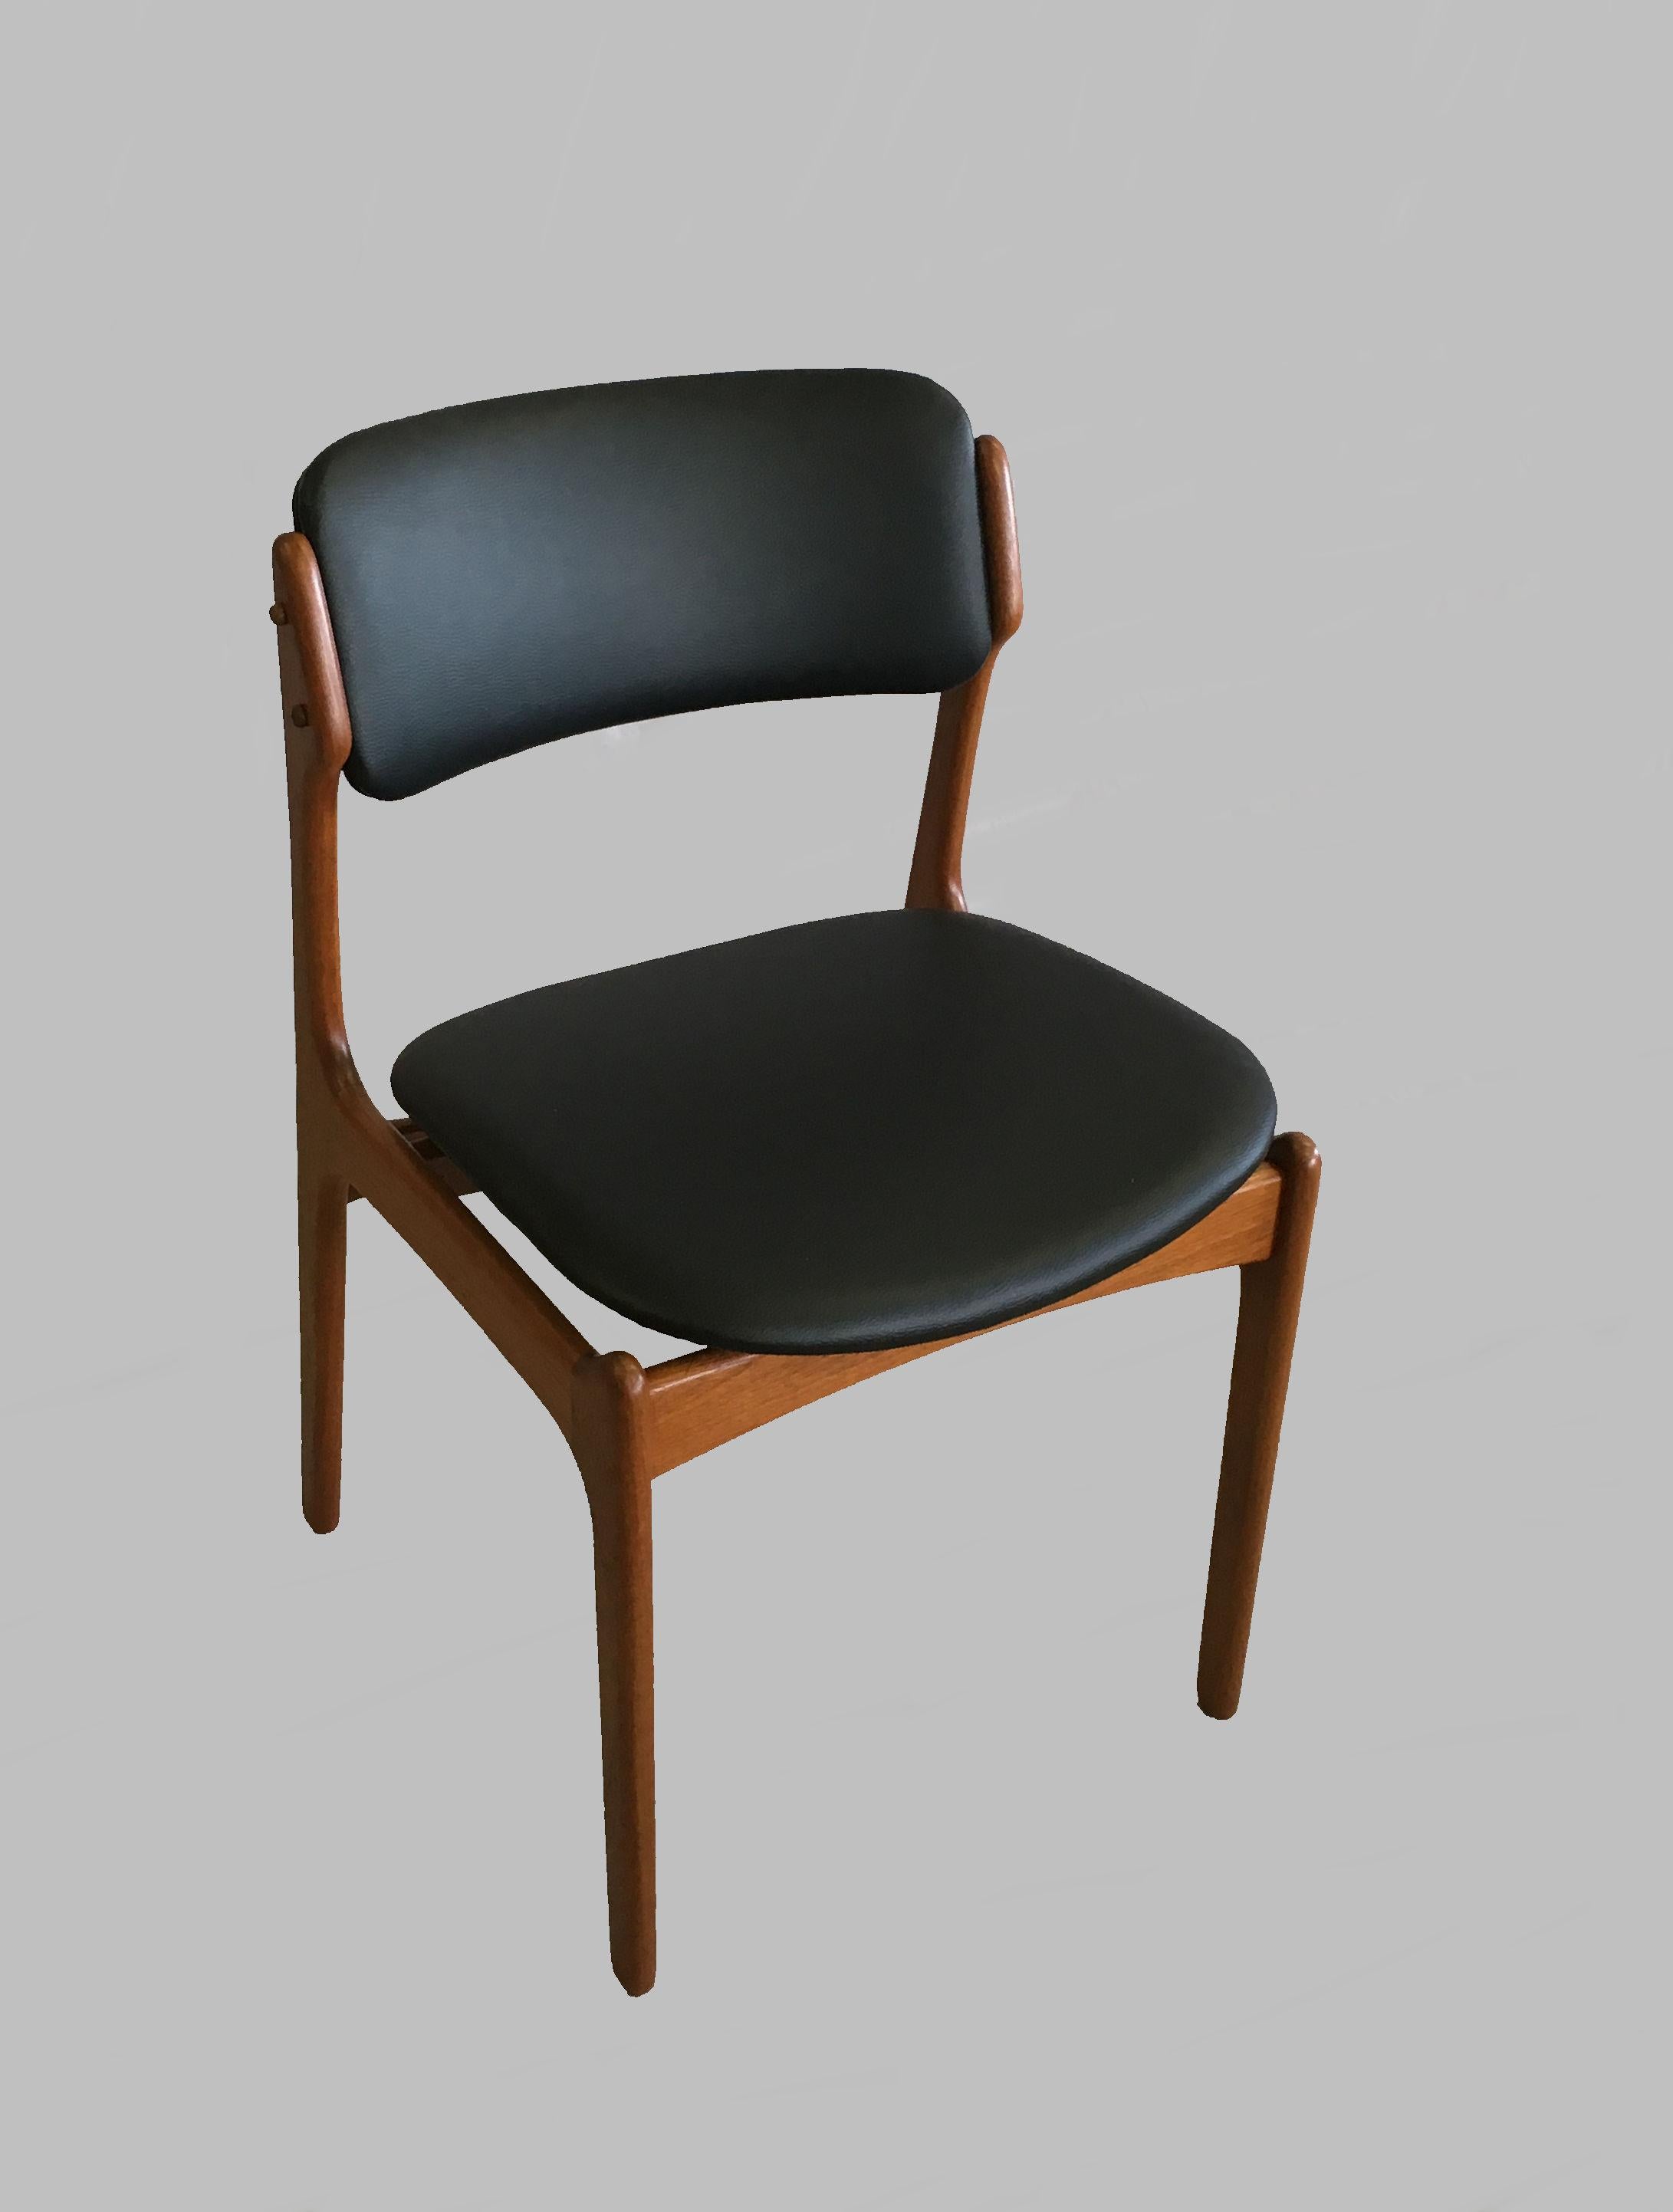 Scandinavian Modern Four Fully Restored Erik Buch Teak Dining Chairs, Reupholstered in Black Leather